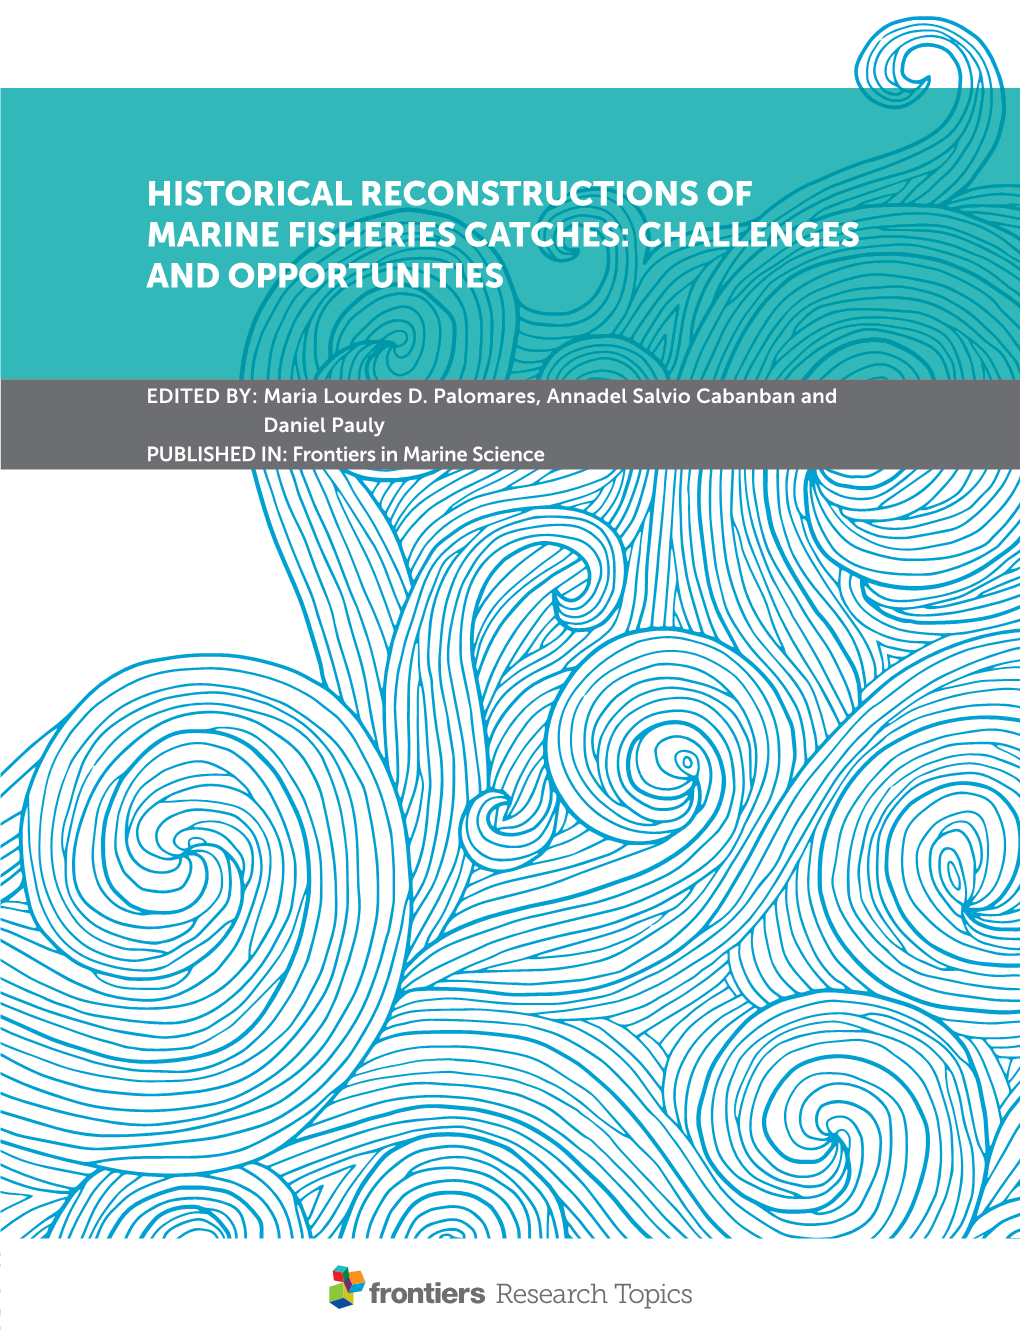 Historical Reconstructions of Marine Fisheries Catches: Challenges and Opportunities